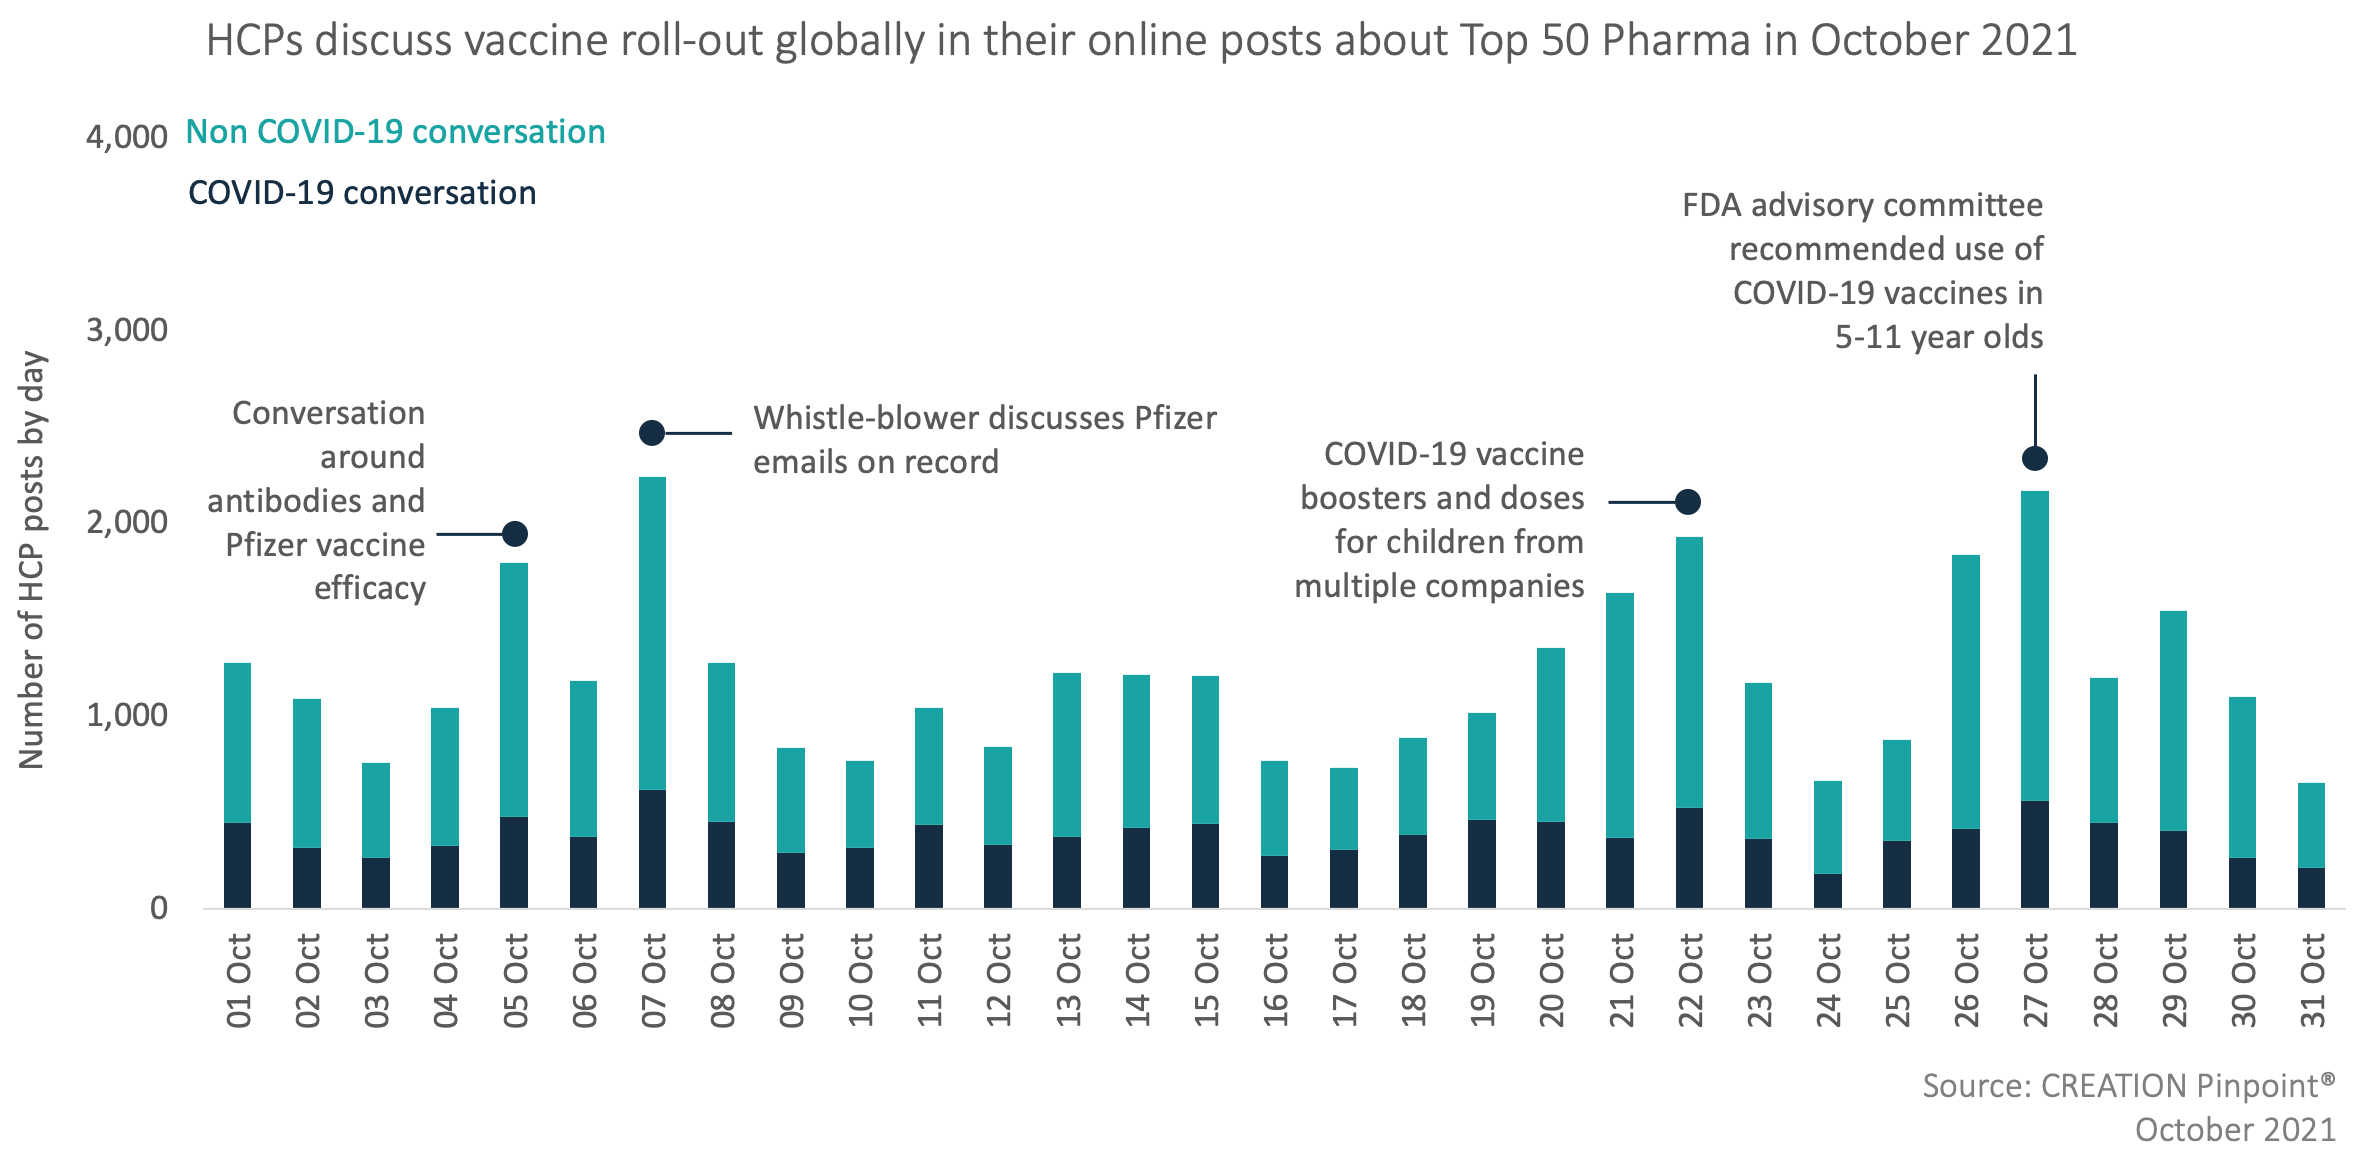 Top 50 pharma mentions over time by HCP on Twitter in October 2021